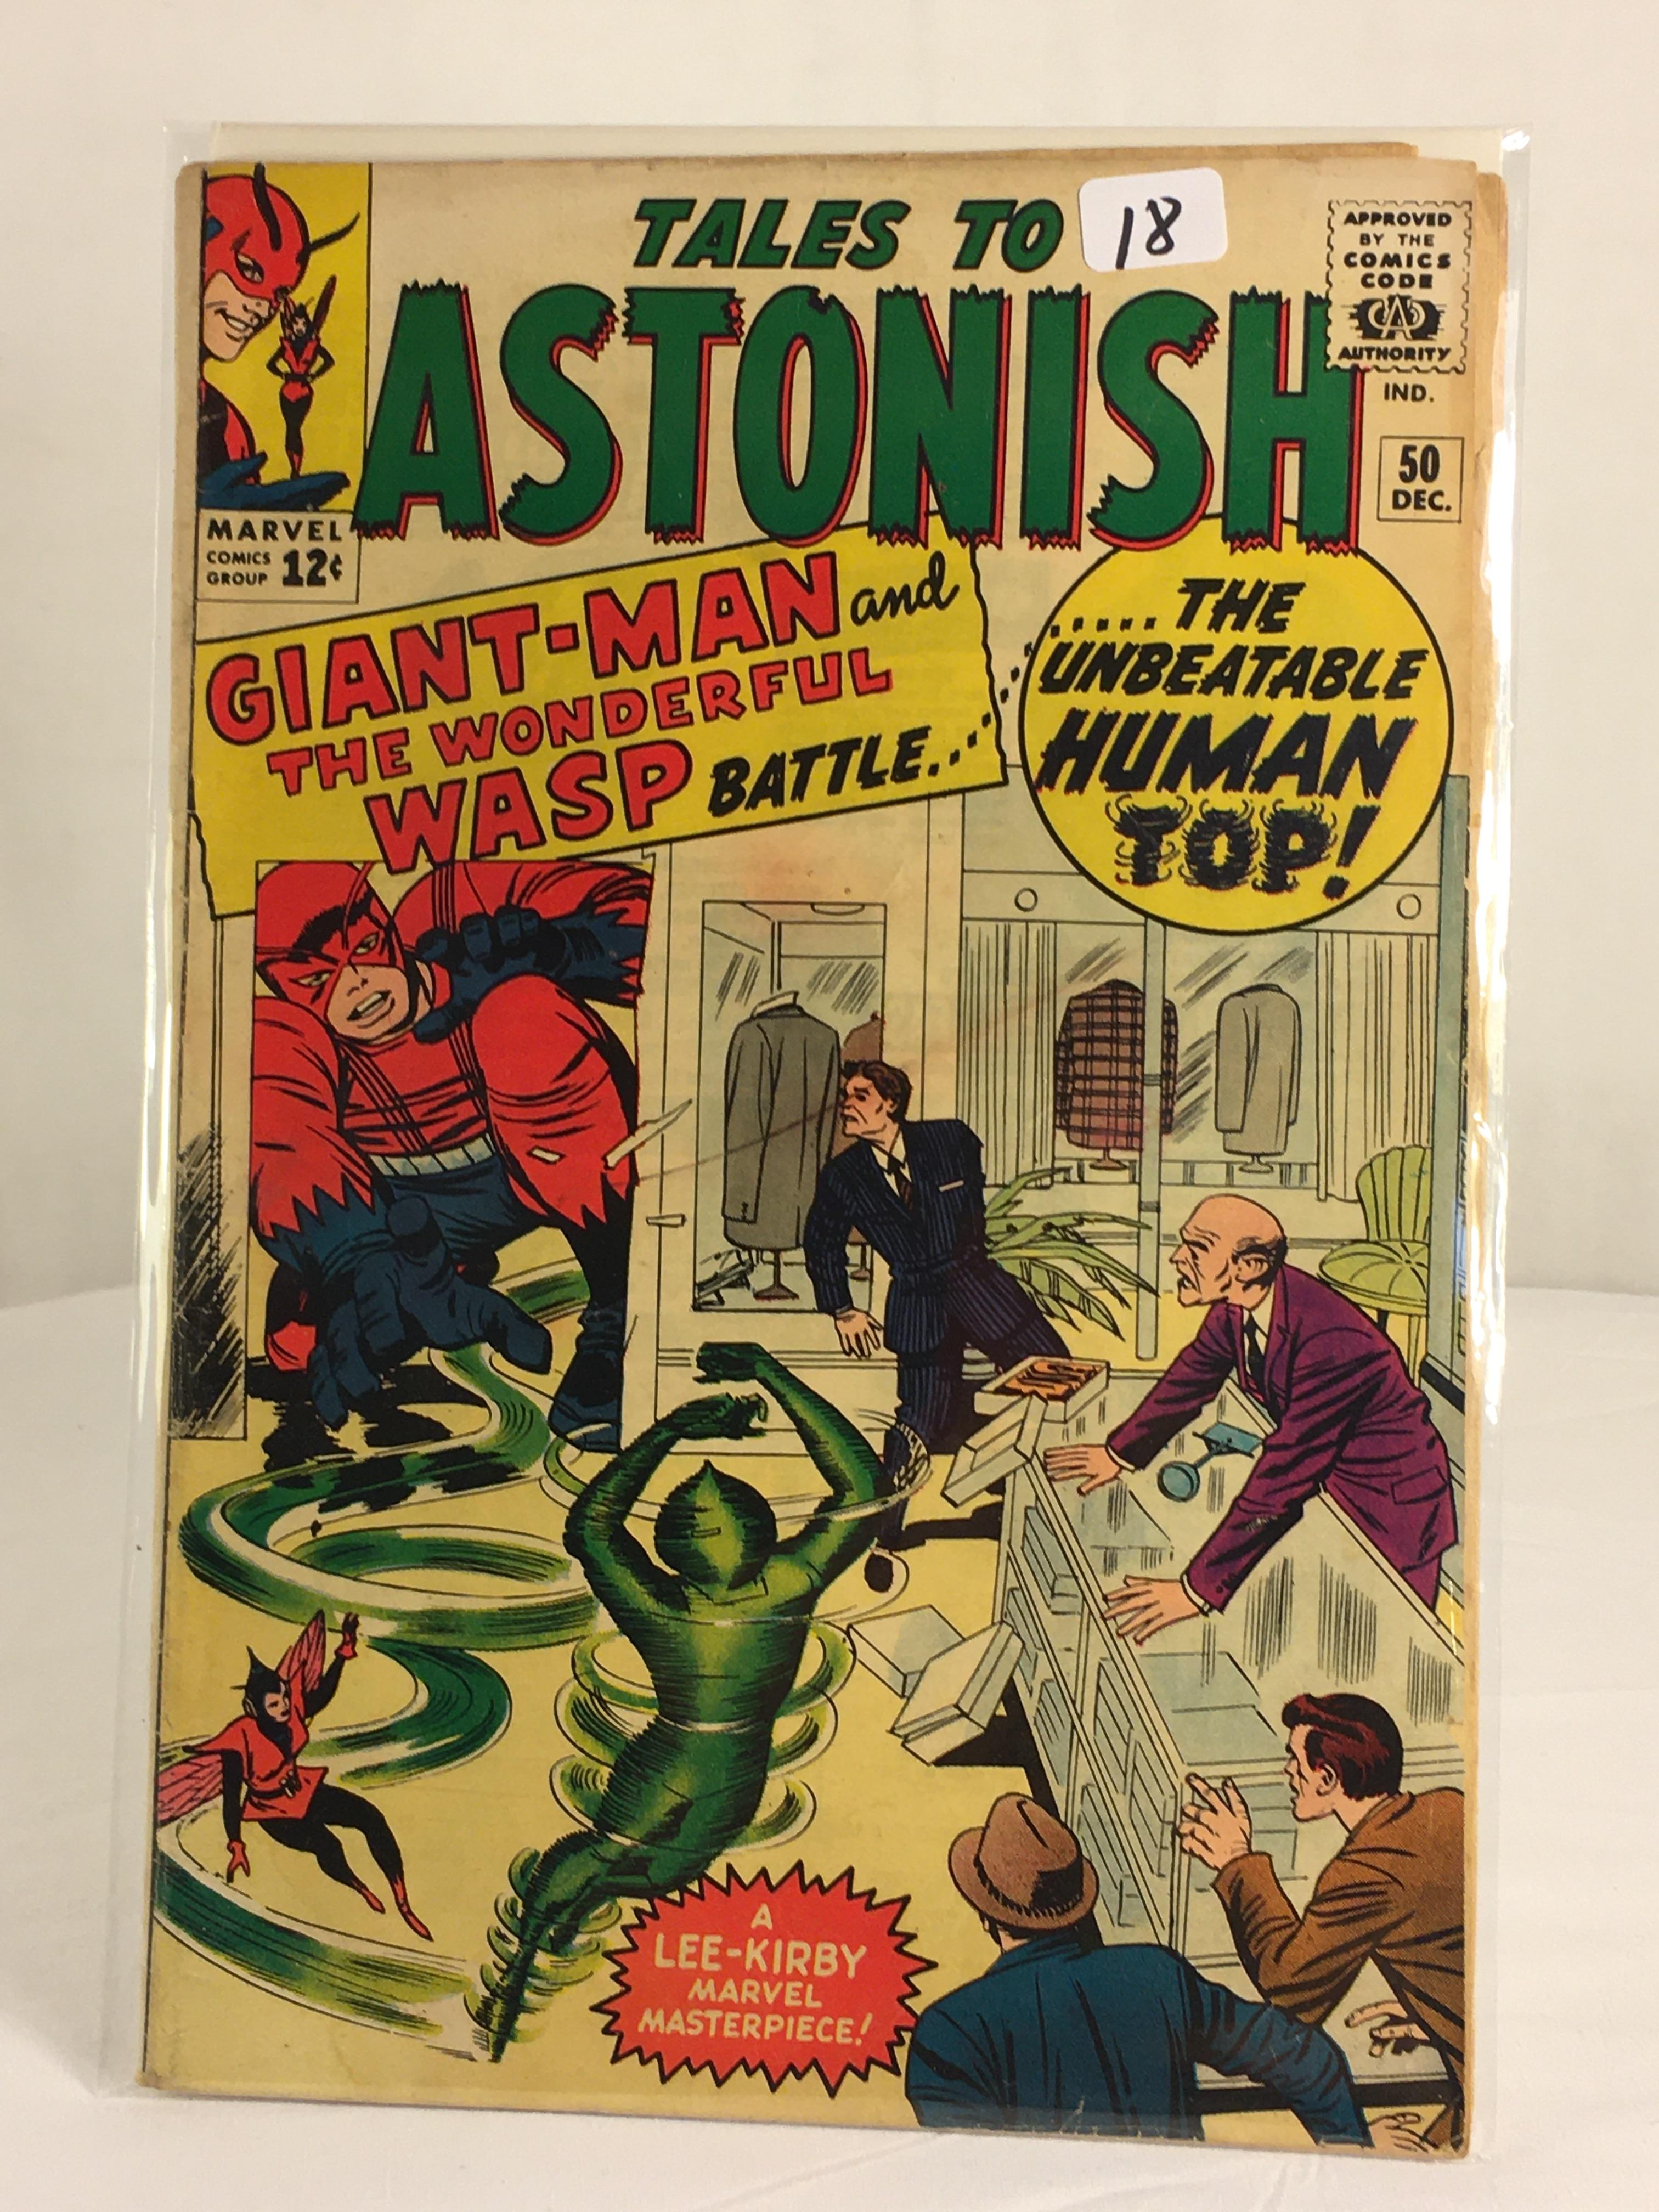 Collector Vintage Marvel Tales To Astonish Giant-Man and Wonderful Wasp Comic Book No.50